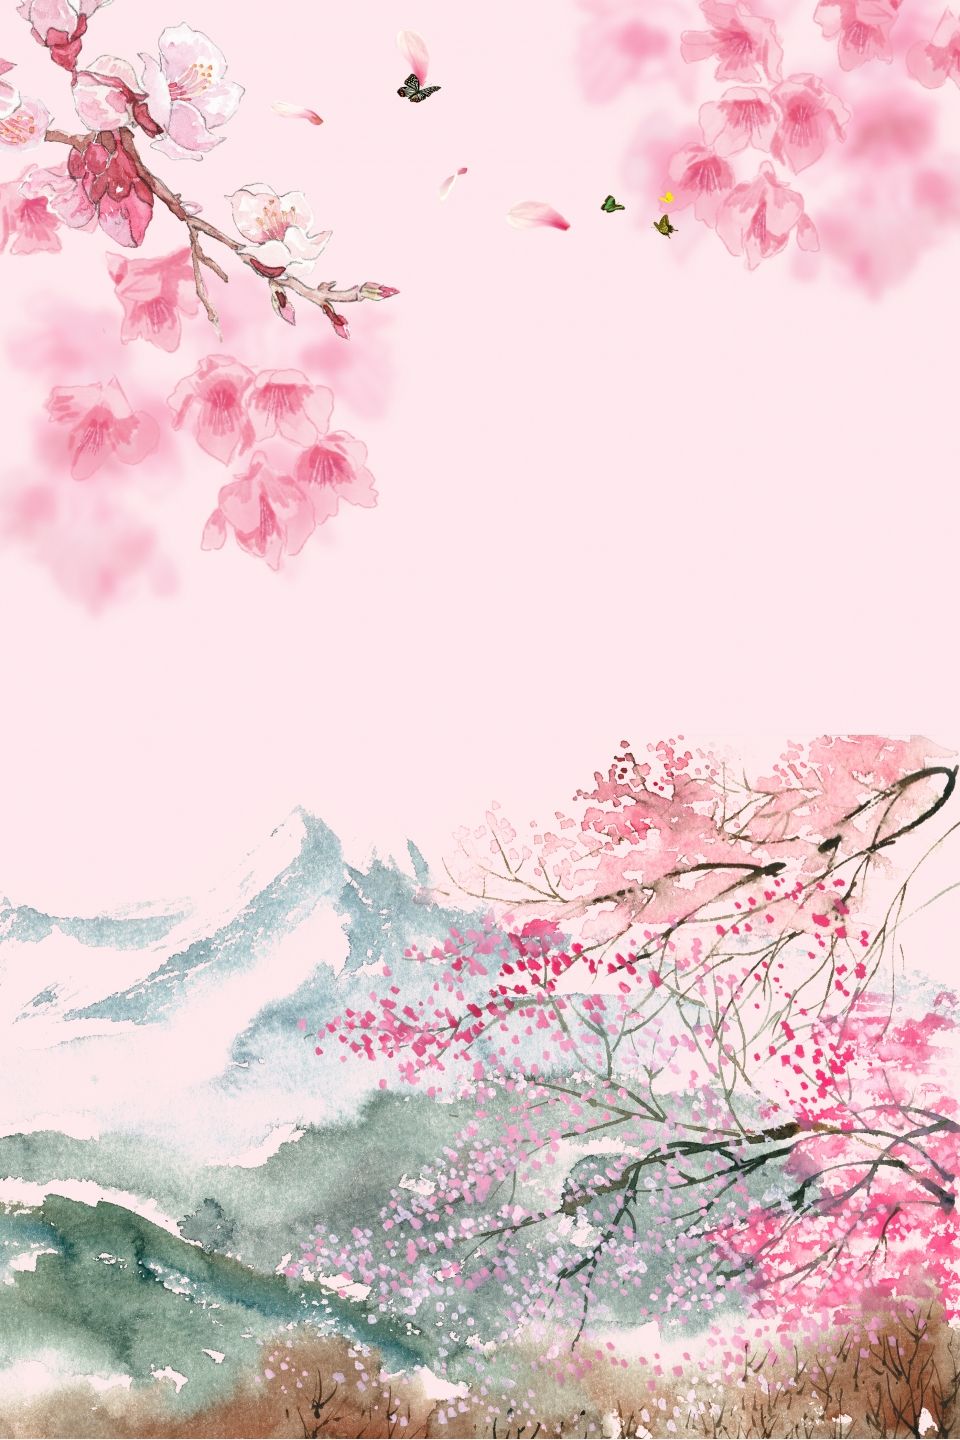 Pink Chinese Style Cherry Blossom Viewing Psd Layered H5 Background Material. Cherry blossom art, Cherry blossom wallpaper, Anime cherry blossom